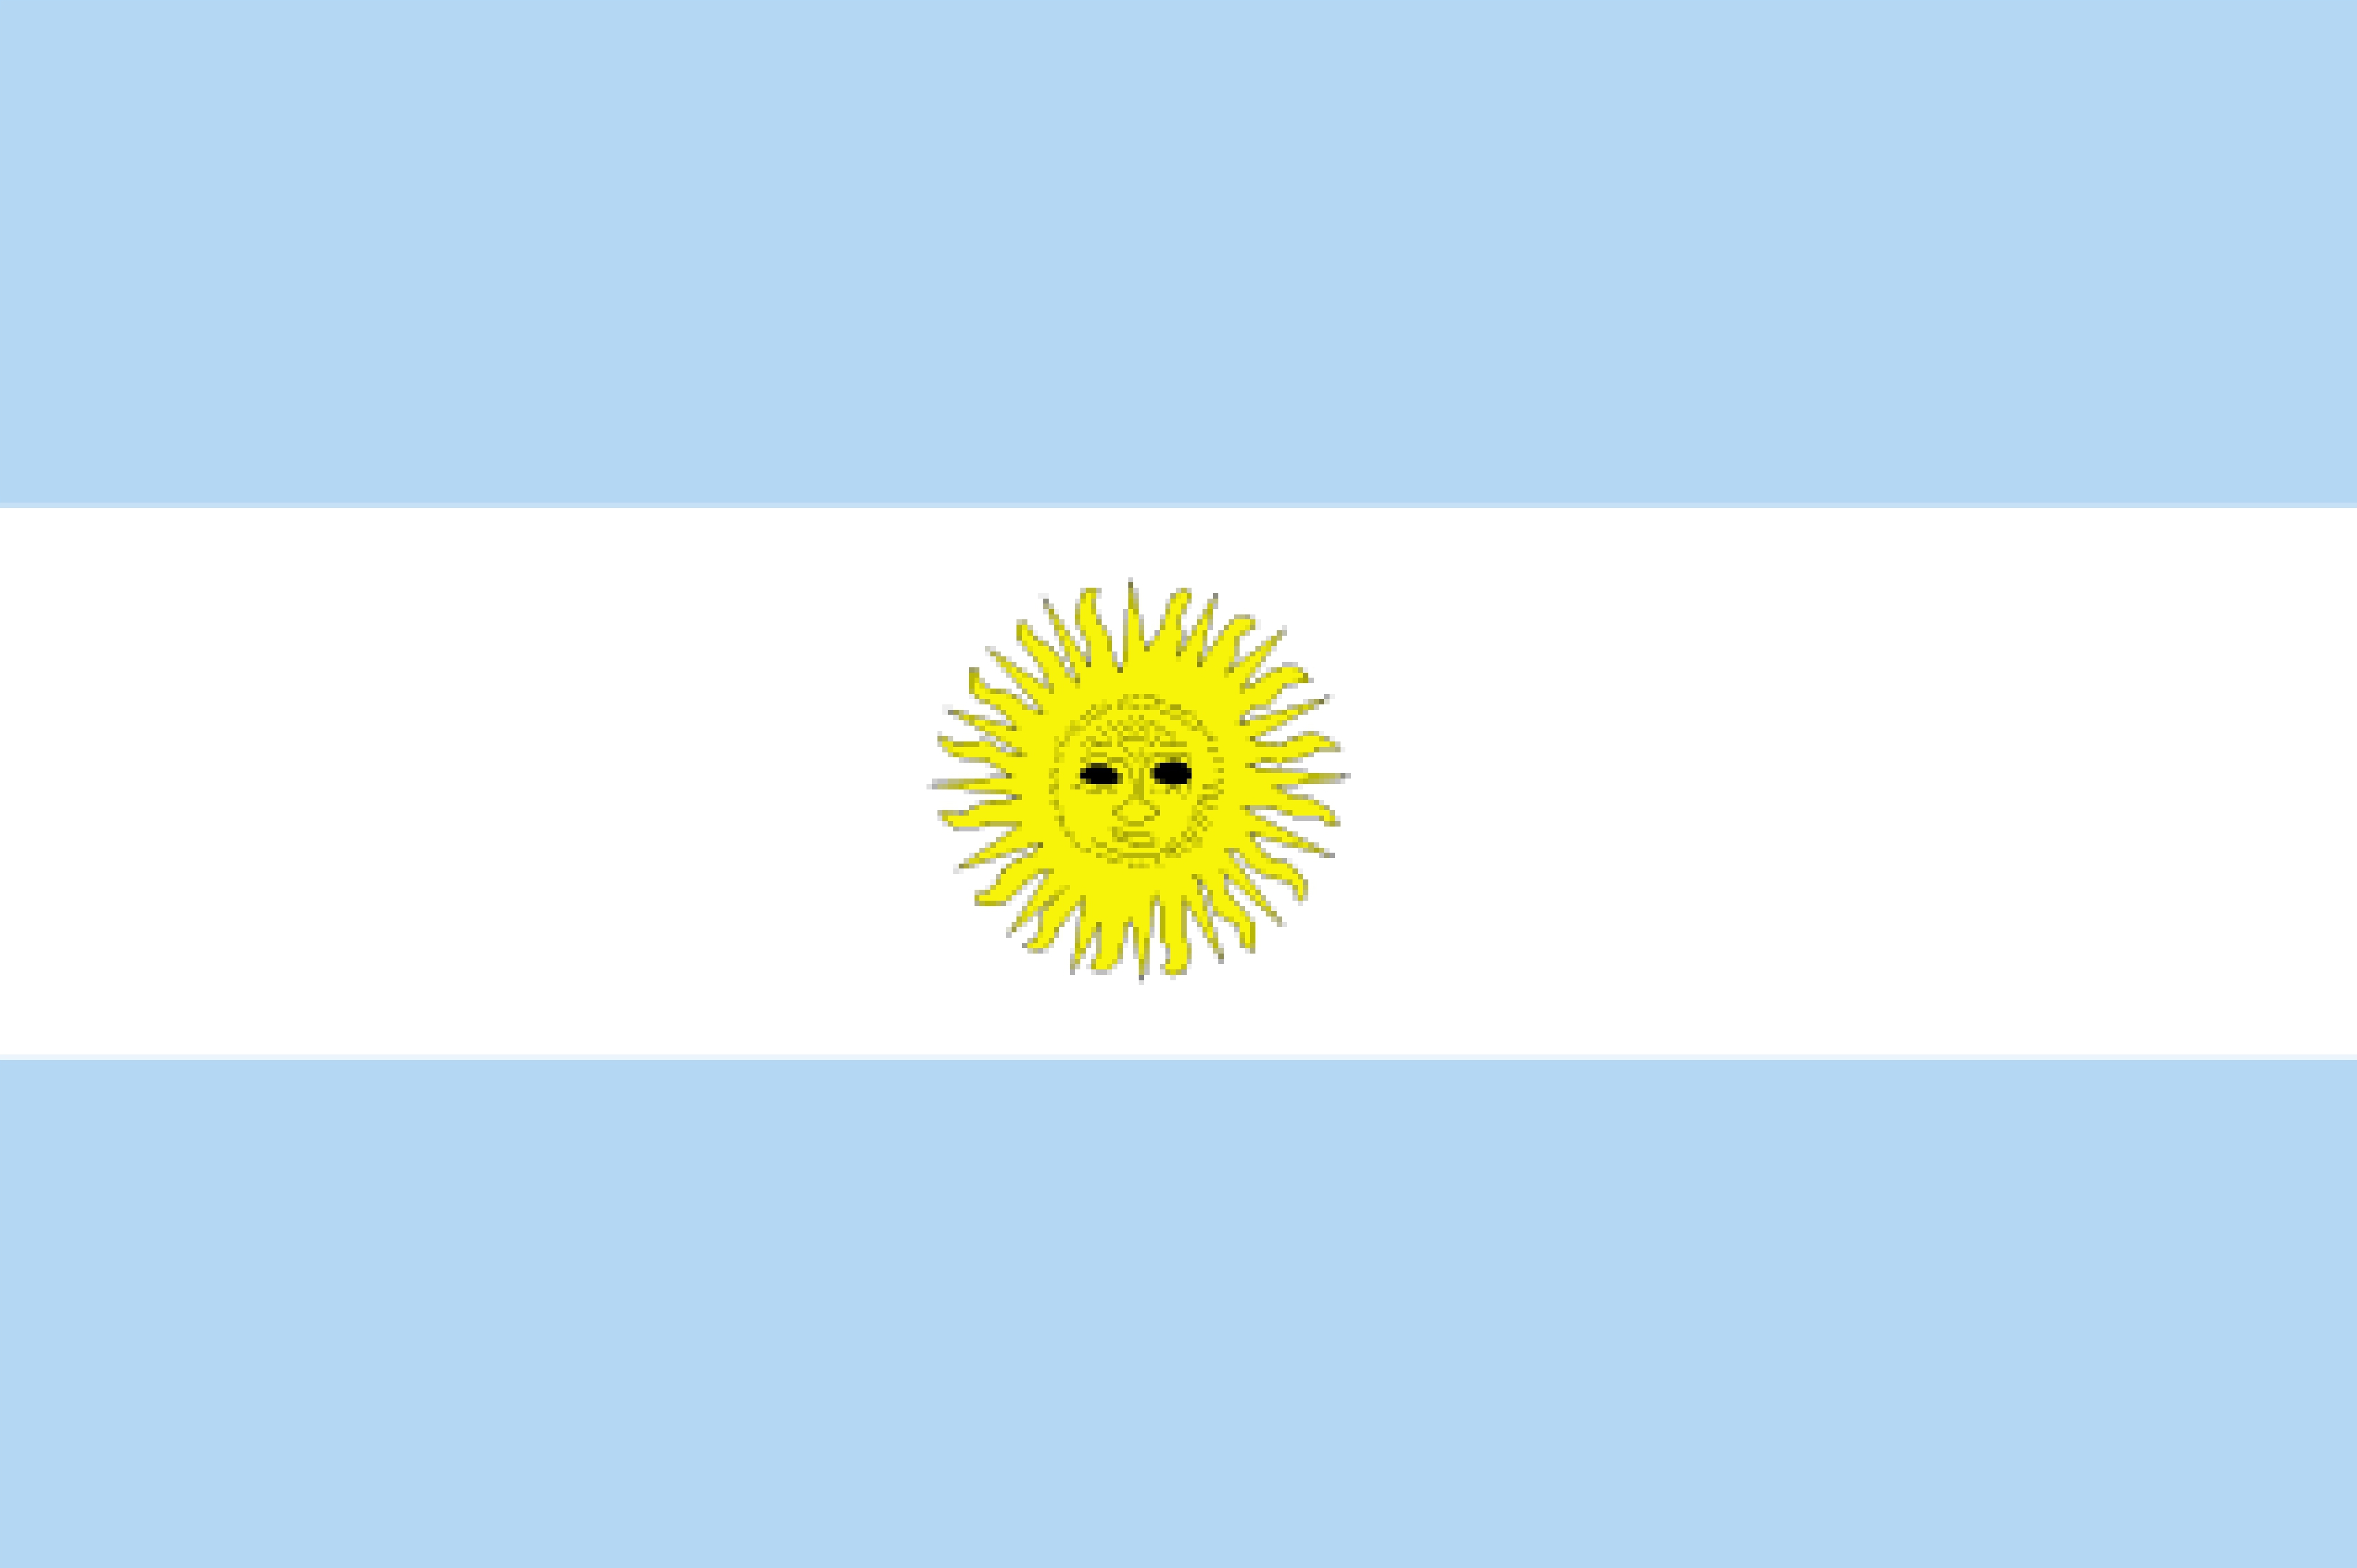 Argentina Flag Wallpapers